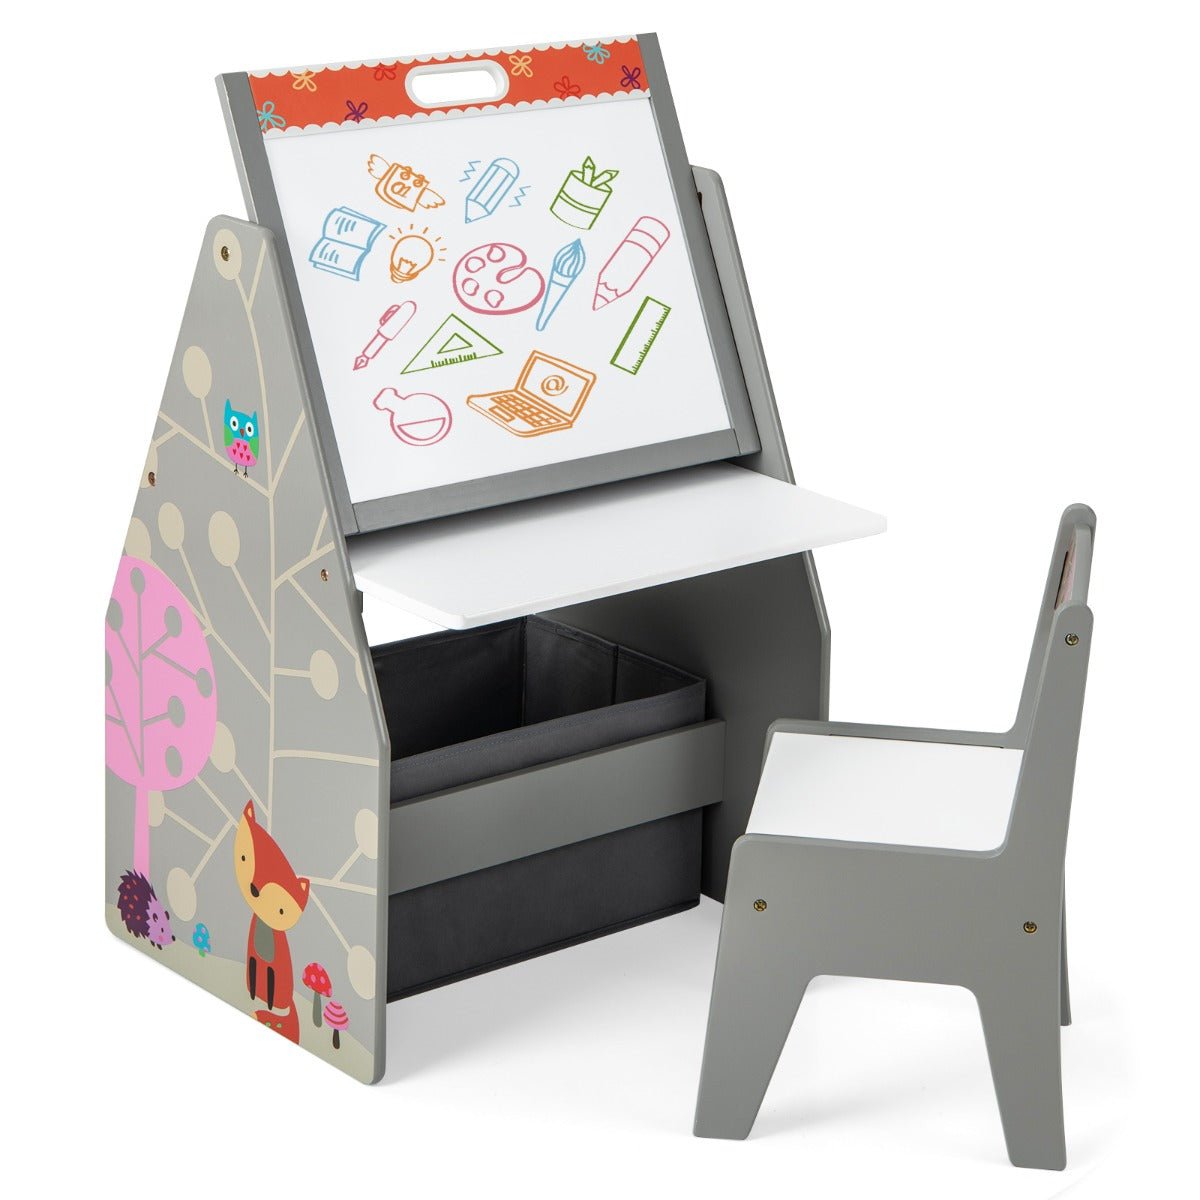 Woodland Animal Themed Grey Art Easel with Chair for Kids - Kids Mega Mart